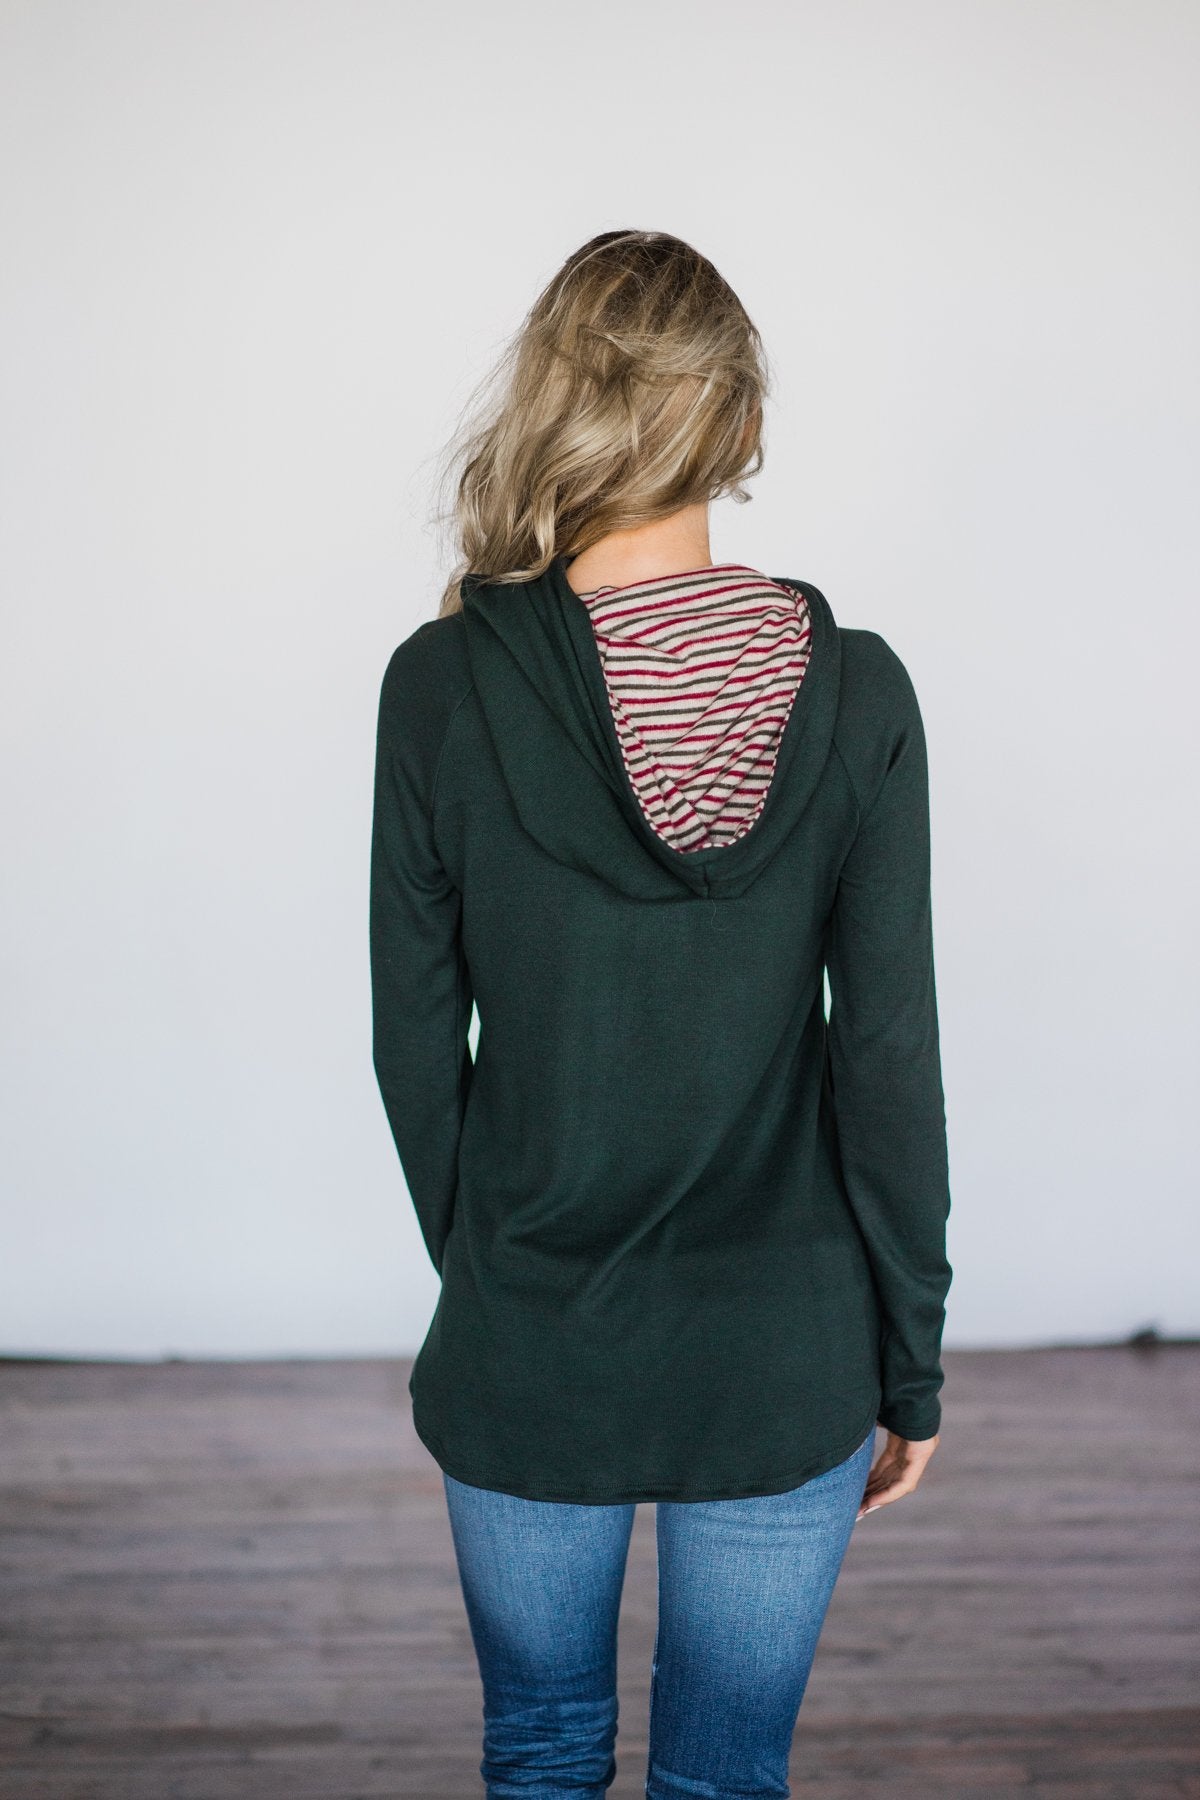 Pine & Candy Cane Striped Hoodie